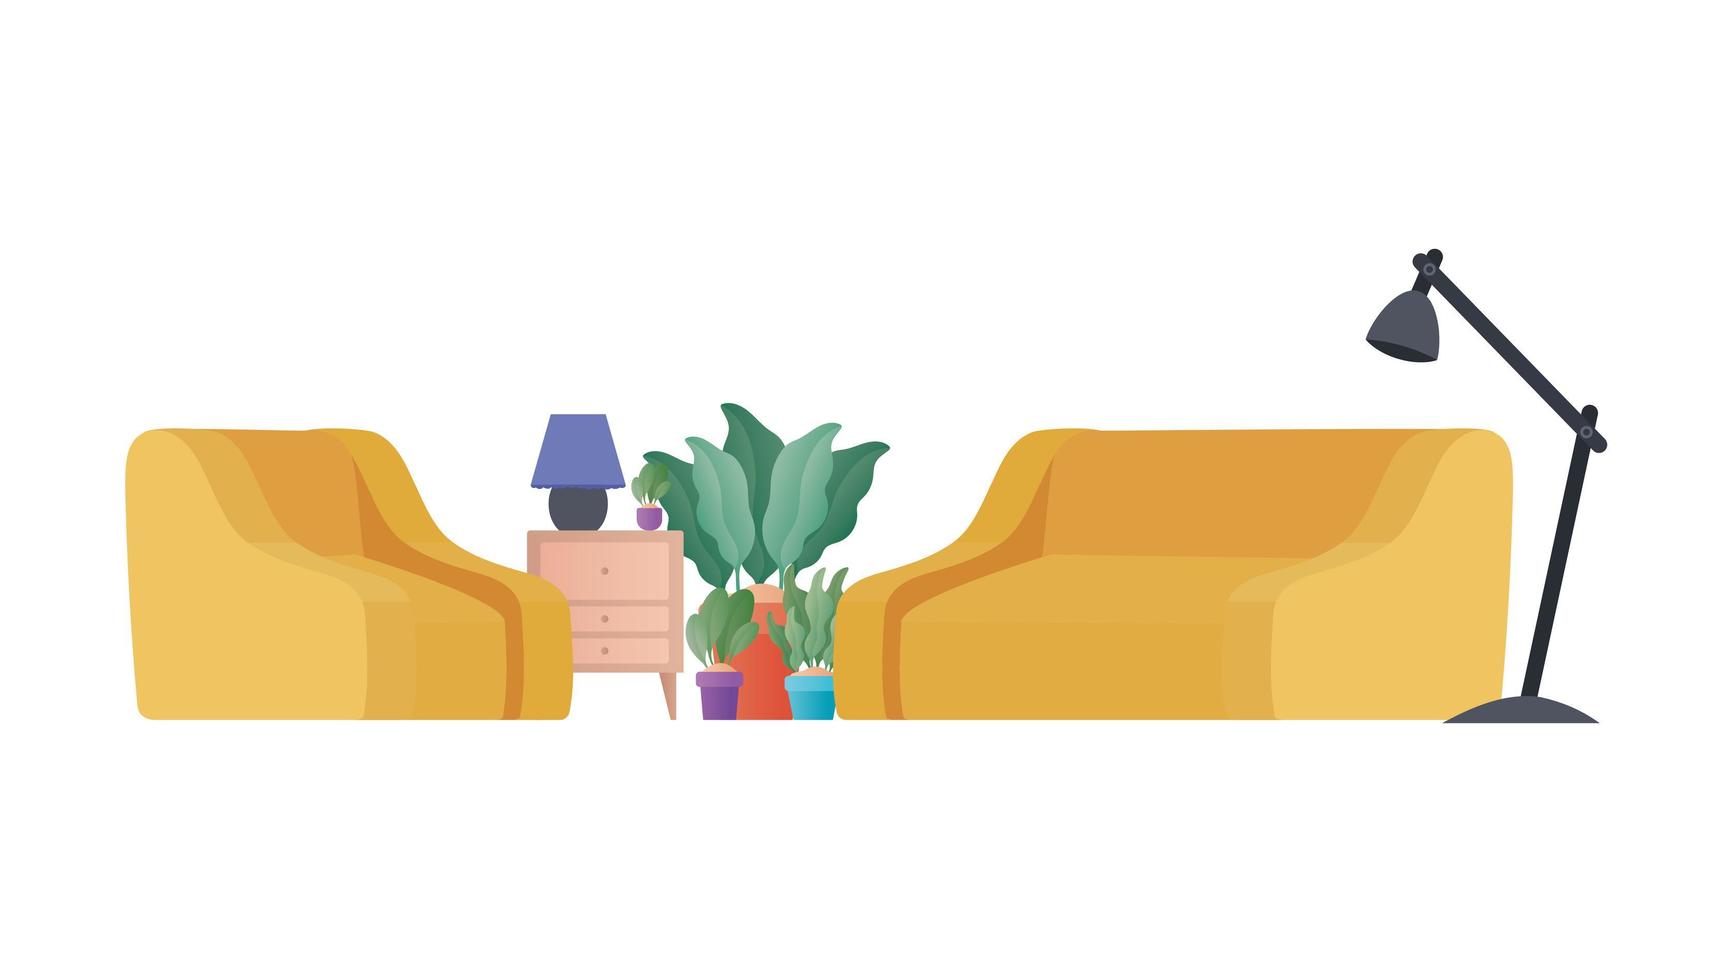 yellow couch and chair with plants vector design